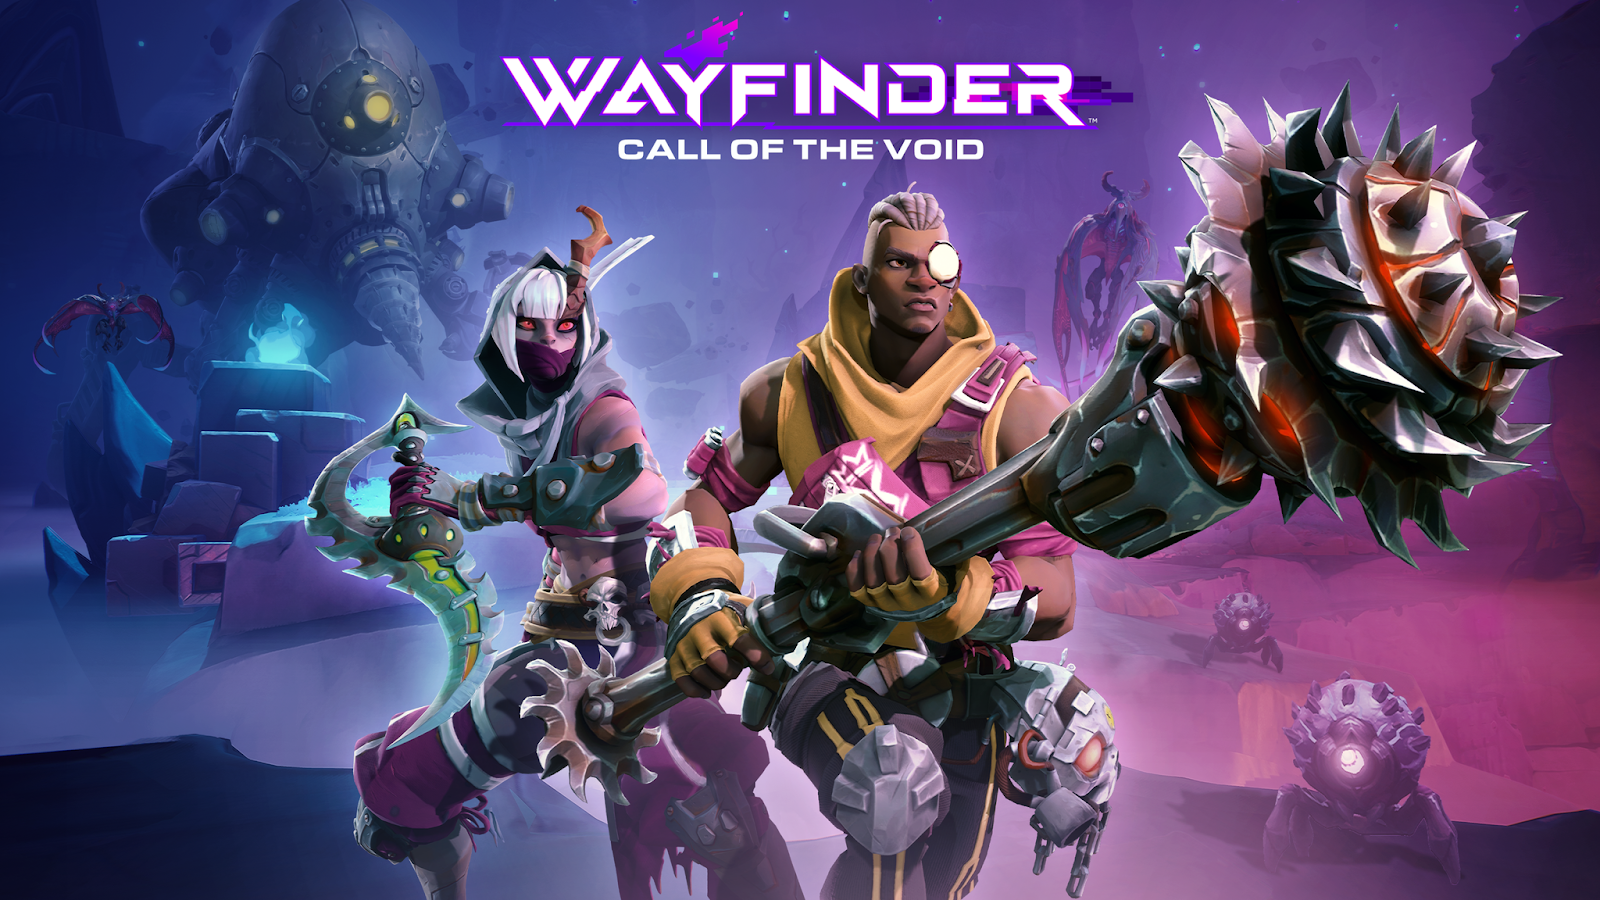 'Call of the Void' Update Now Available for Wayfinder - Mid-Season Content Arrives